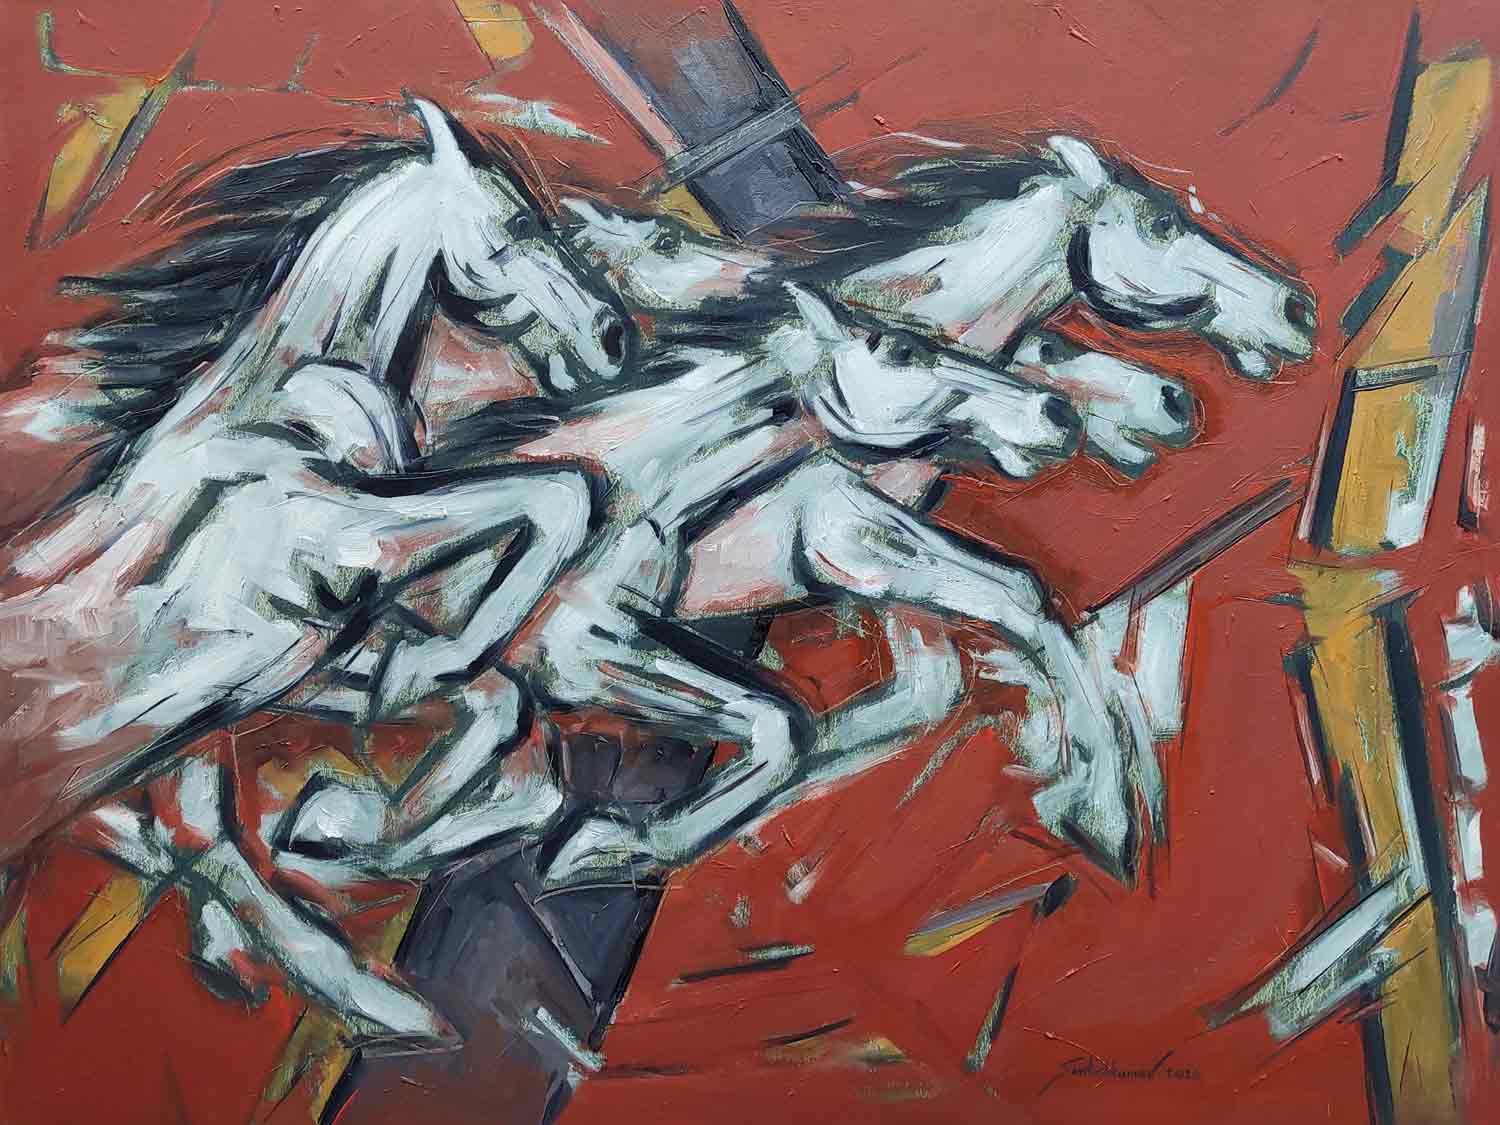 Semi Figurative Painting with Oil on Canvas "Horse" art by Santoshkumar Patil